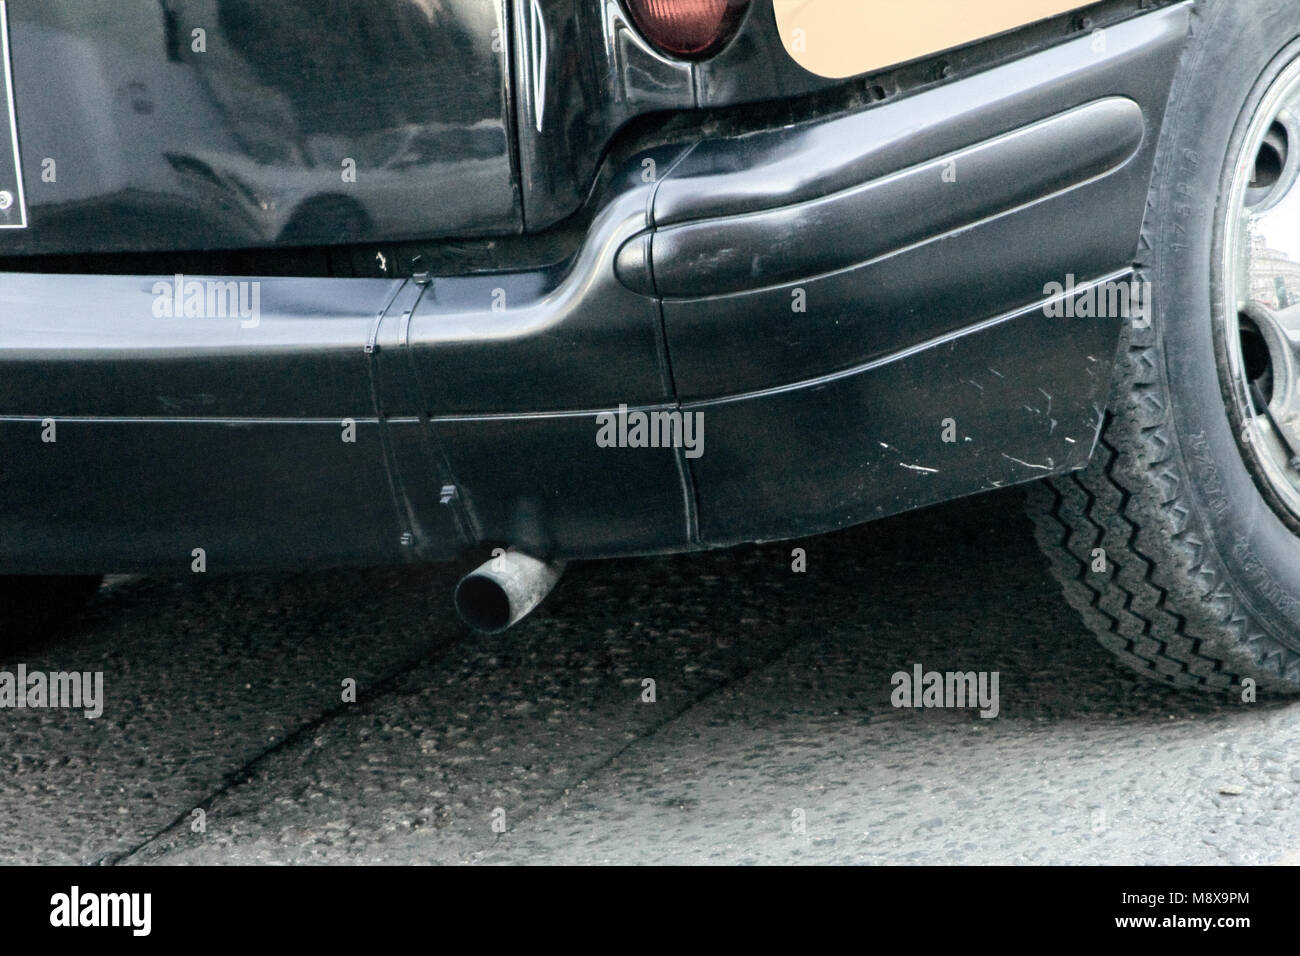 Rear of a taxi, showing exhaust, depicting pollution Stock Photo